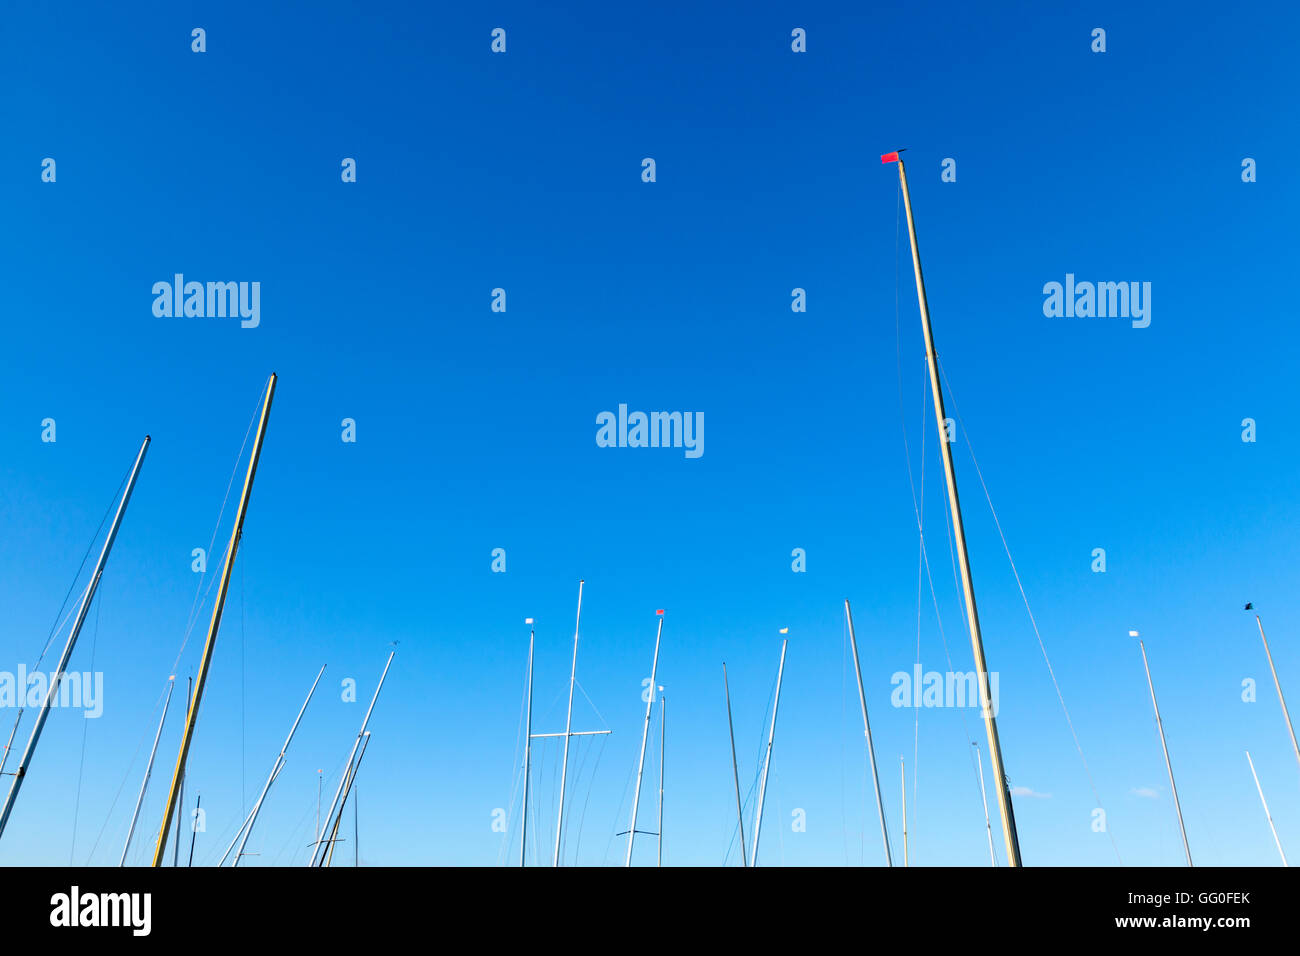 Lots of yacht masts against a blue sky, England, UK Stock Photo